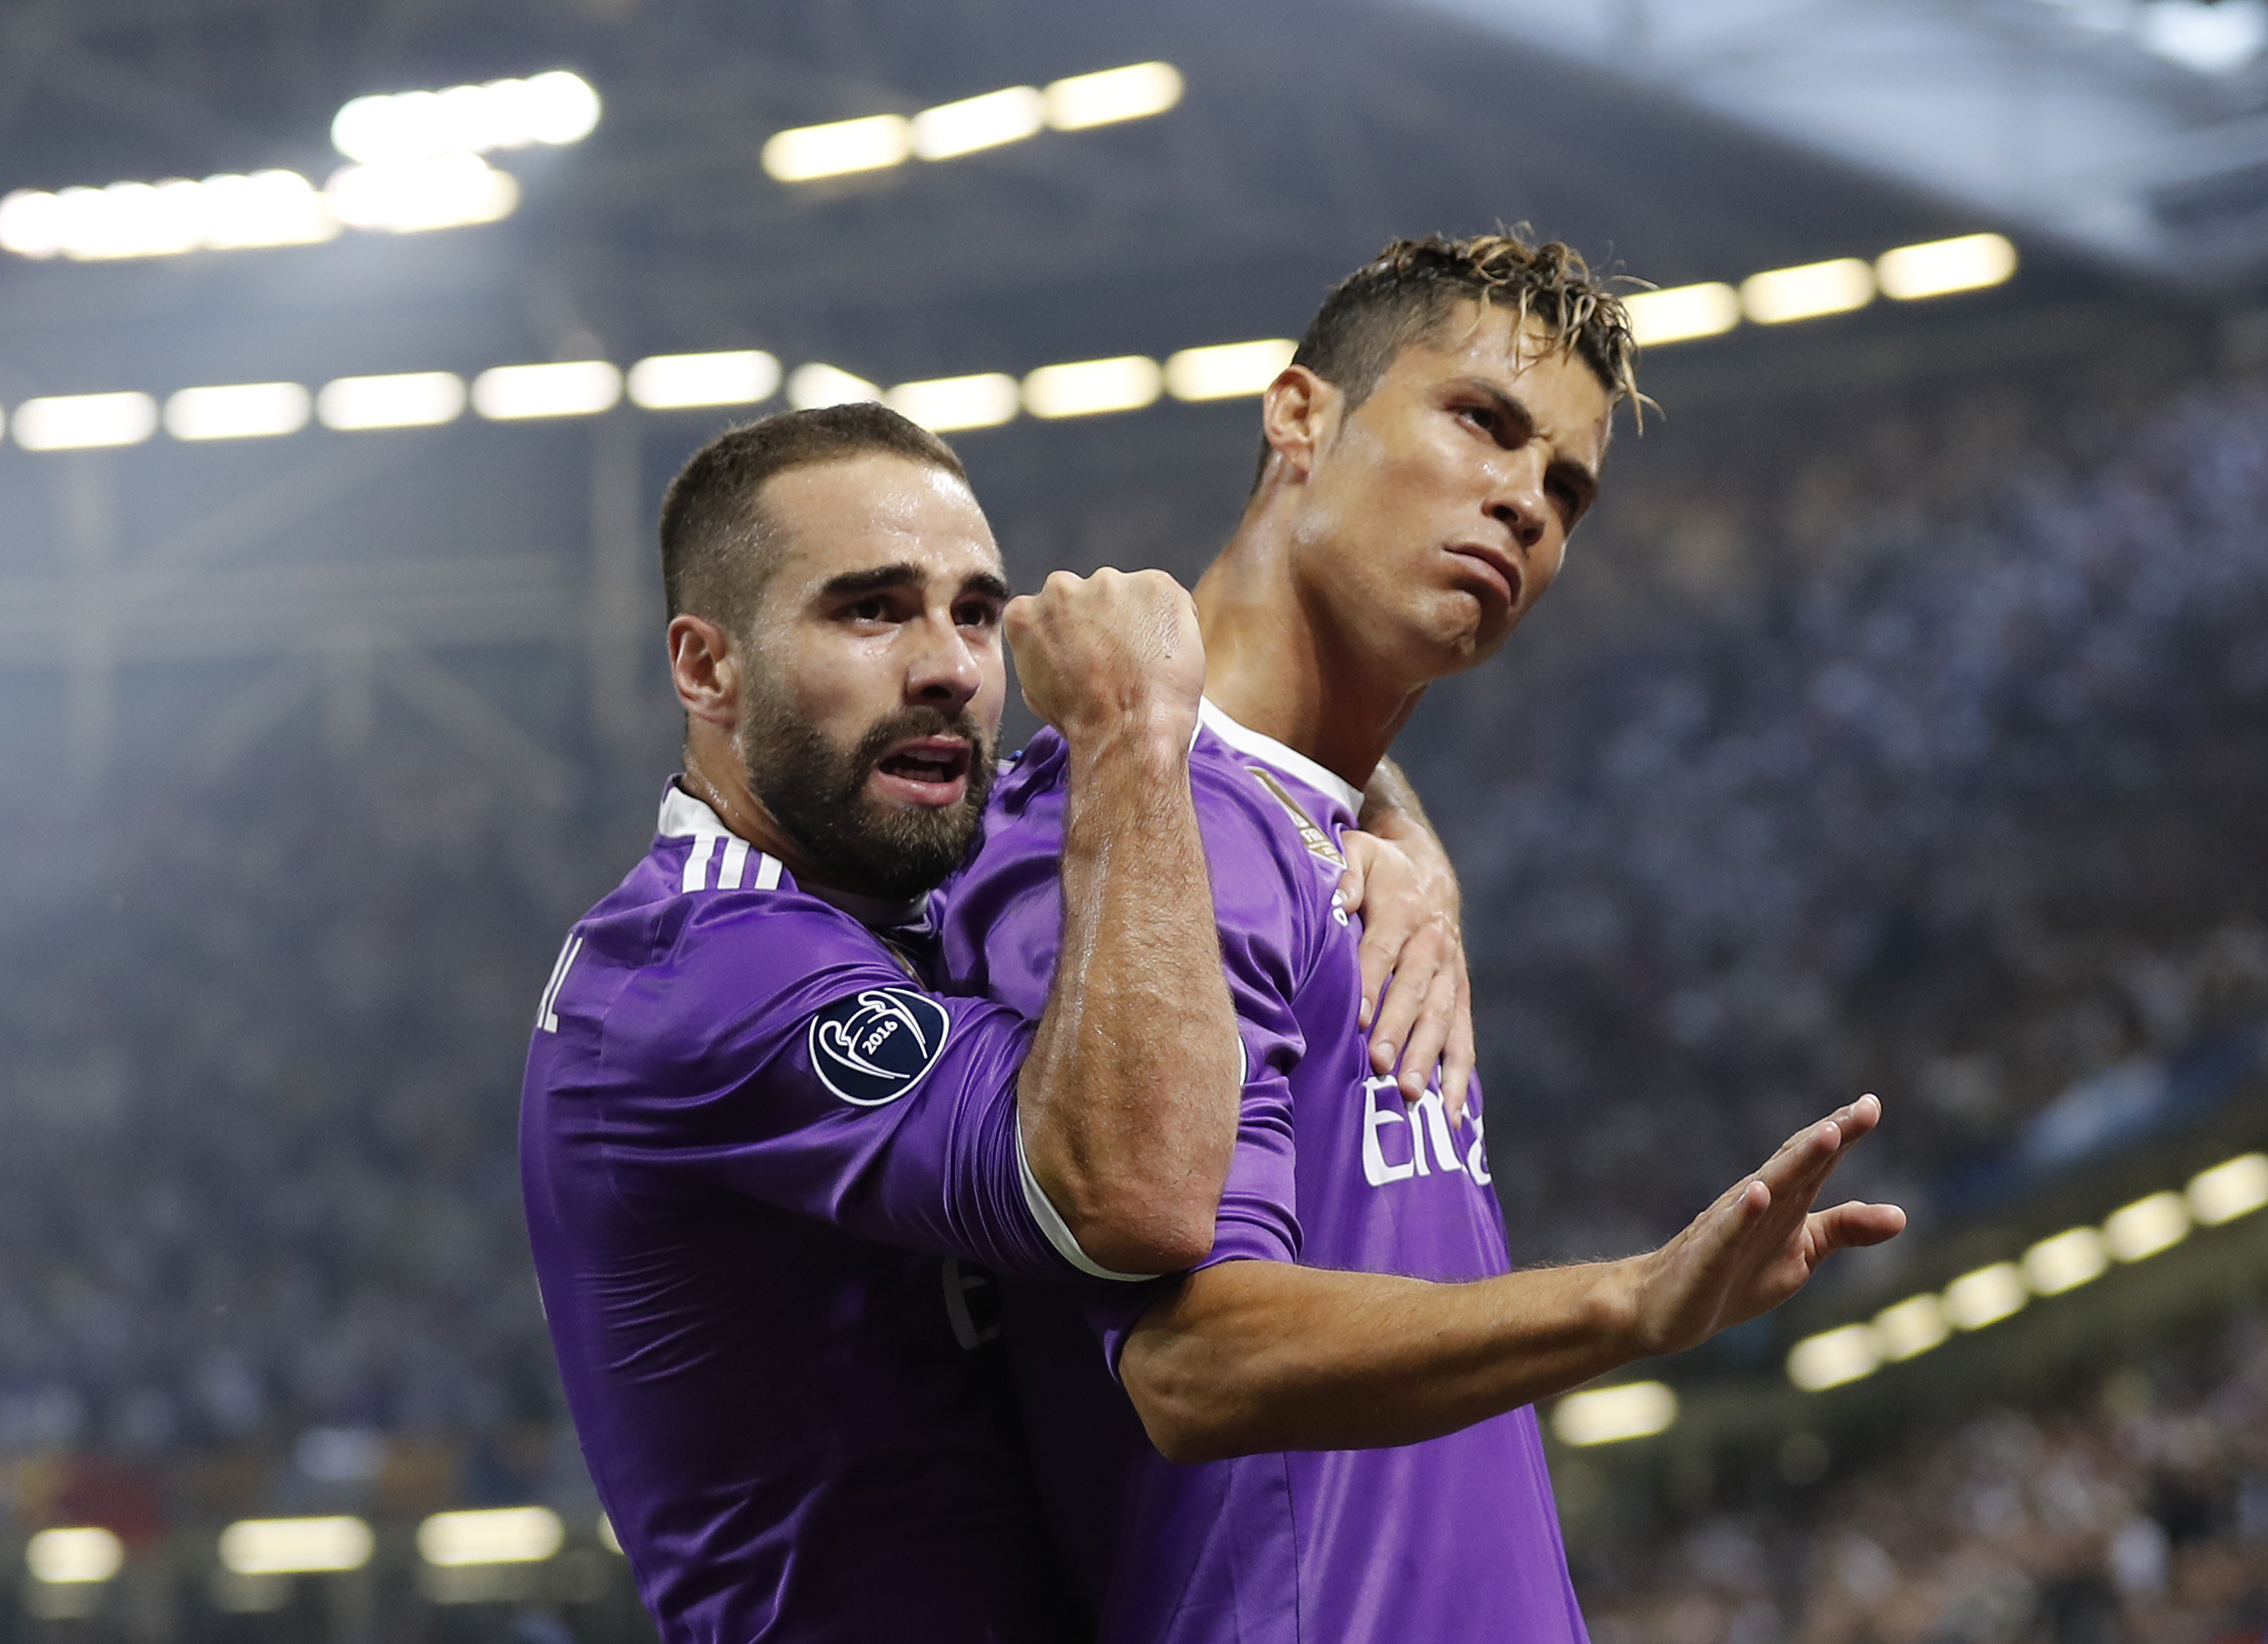 Britain Soccer Football - Juventus v Real Madrid - UEFA Champions League Final - The National Stadium of Wales, Cardiff - June 3, 2017 Real Madrid's Cristiano Ronaldo celebrates scoring their first goal with Daniel Carvajal Reuters / Eddie Keogh Livepic